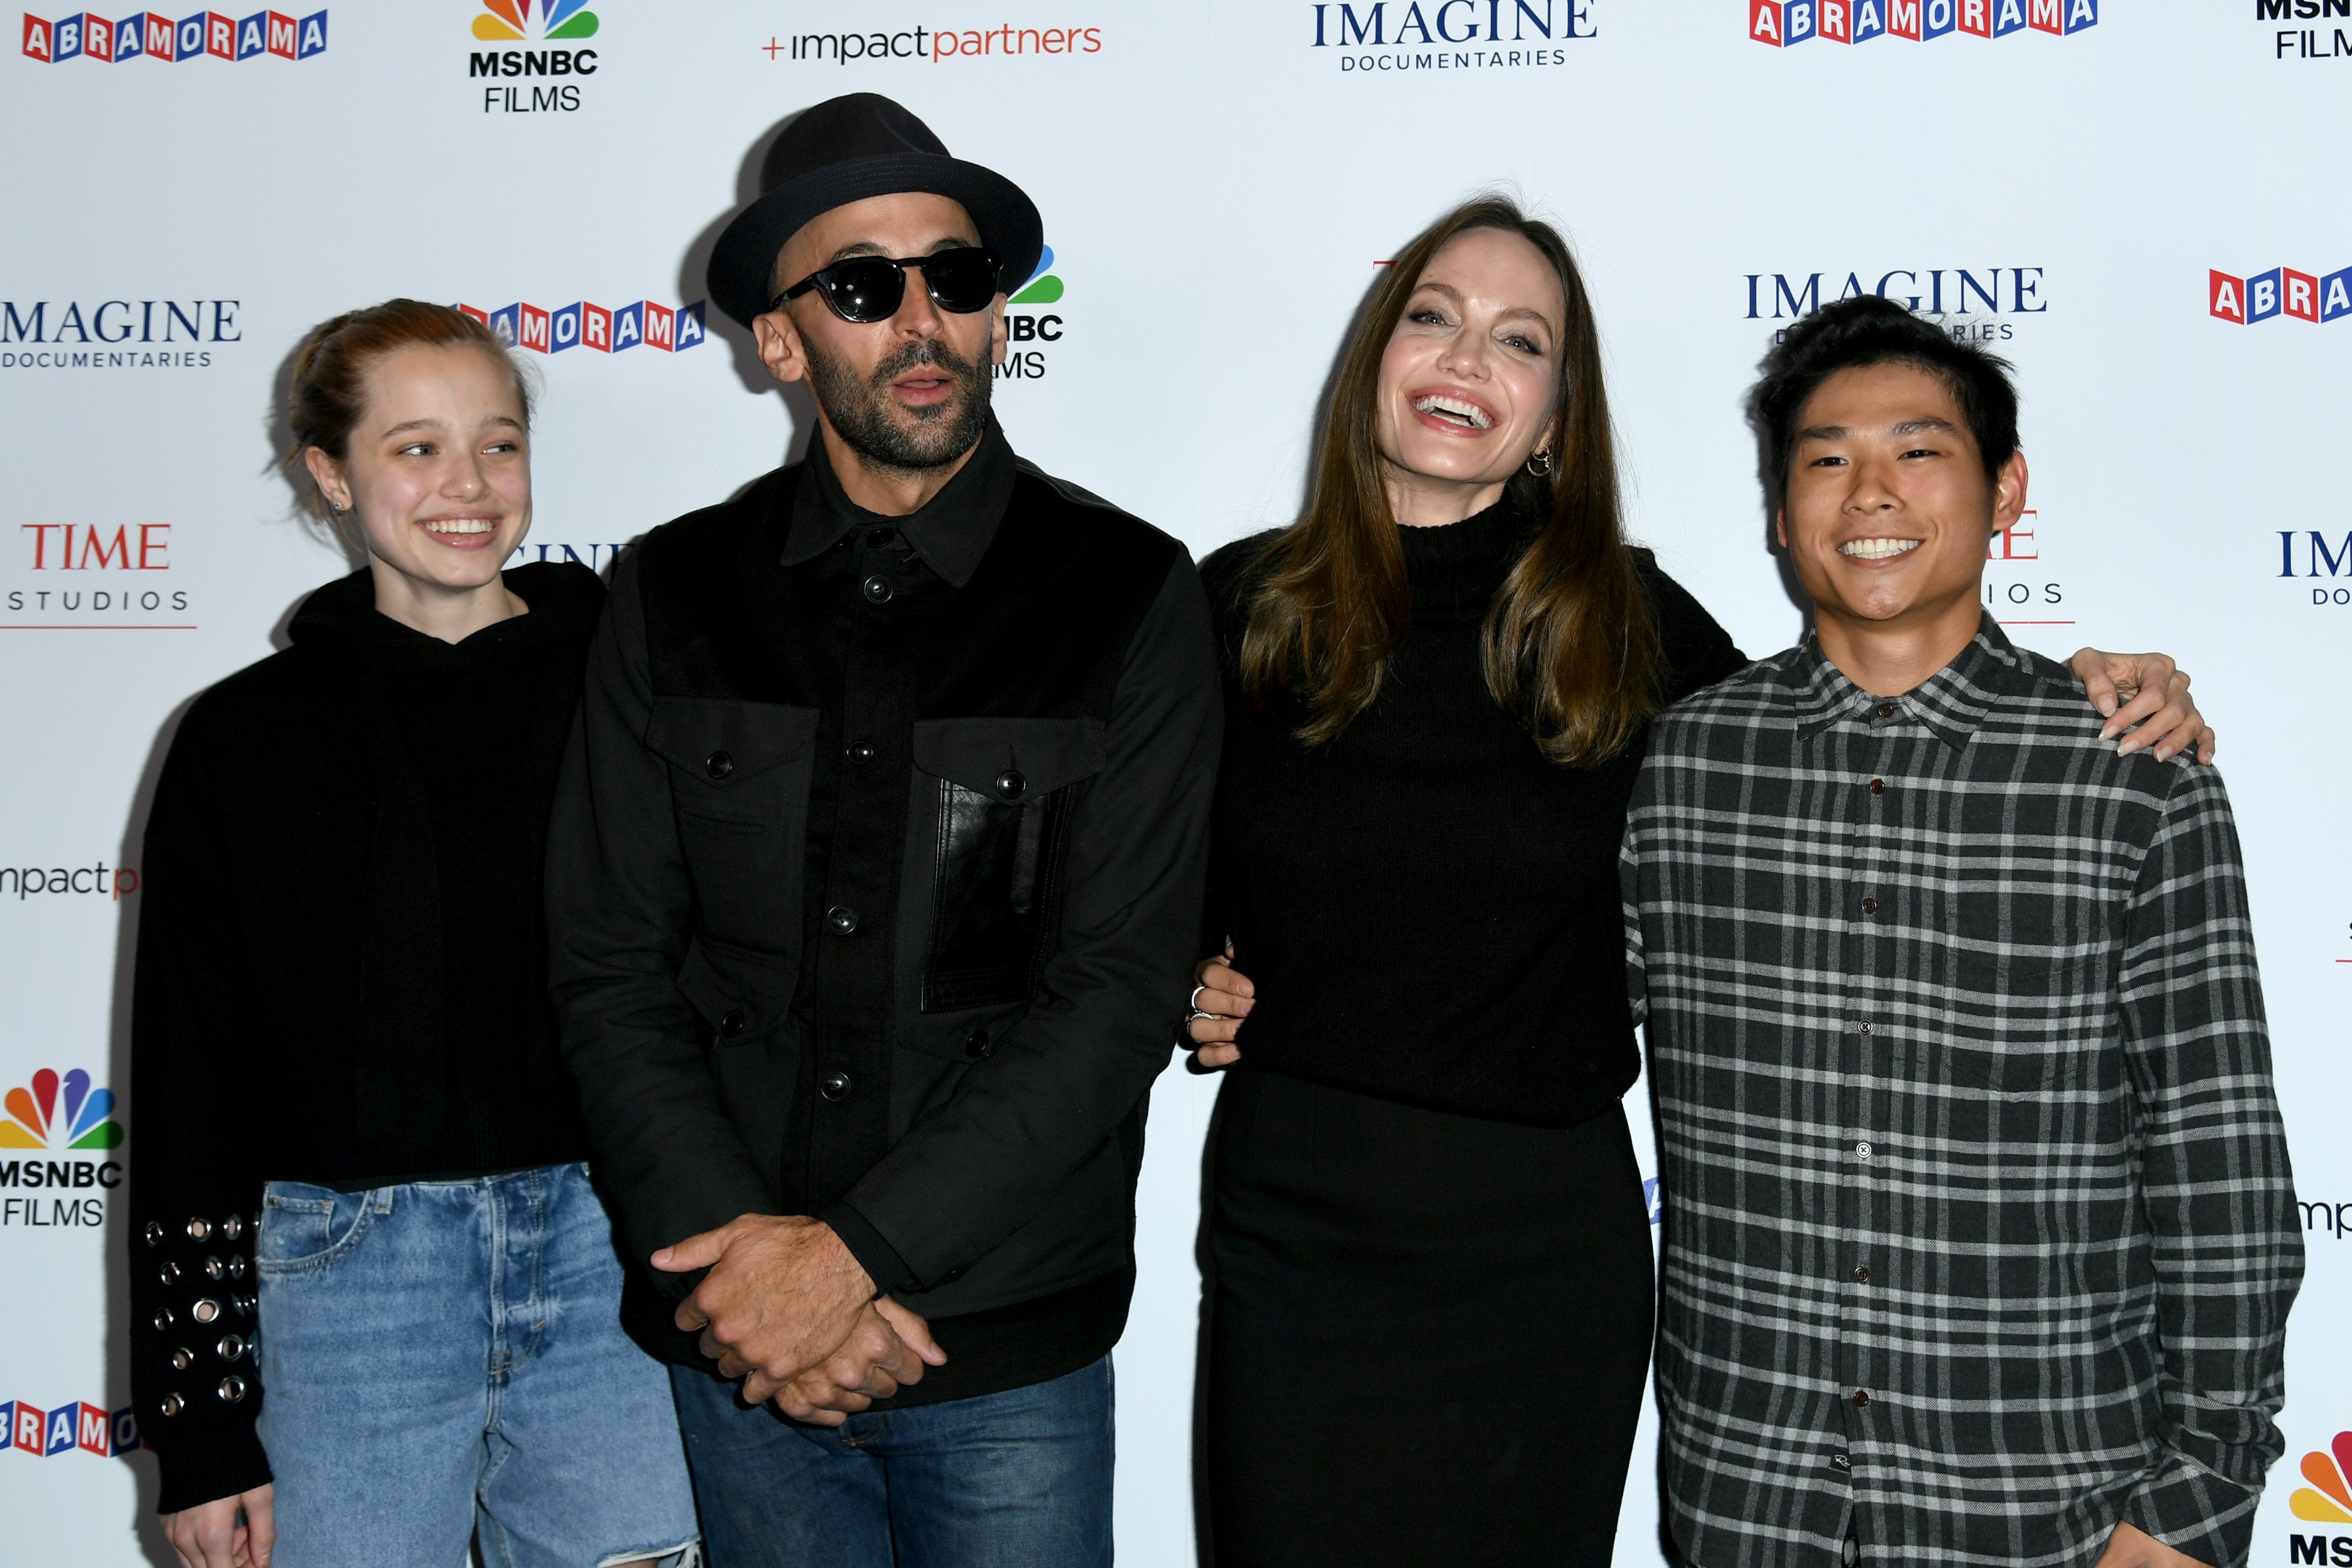 Shiloh Jolie-Pitt, street artist JR, actress Angelina Jolie and Pax Thien Jolie-Pitt attend the Los Angeles premiere of MSNBC Films' "Paper & Glue: A JR Project" at Museum Of Tolerance on November 18, 2021 in Los Angeles, California. | Source: Getty Images